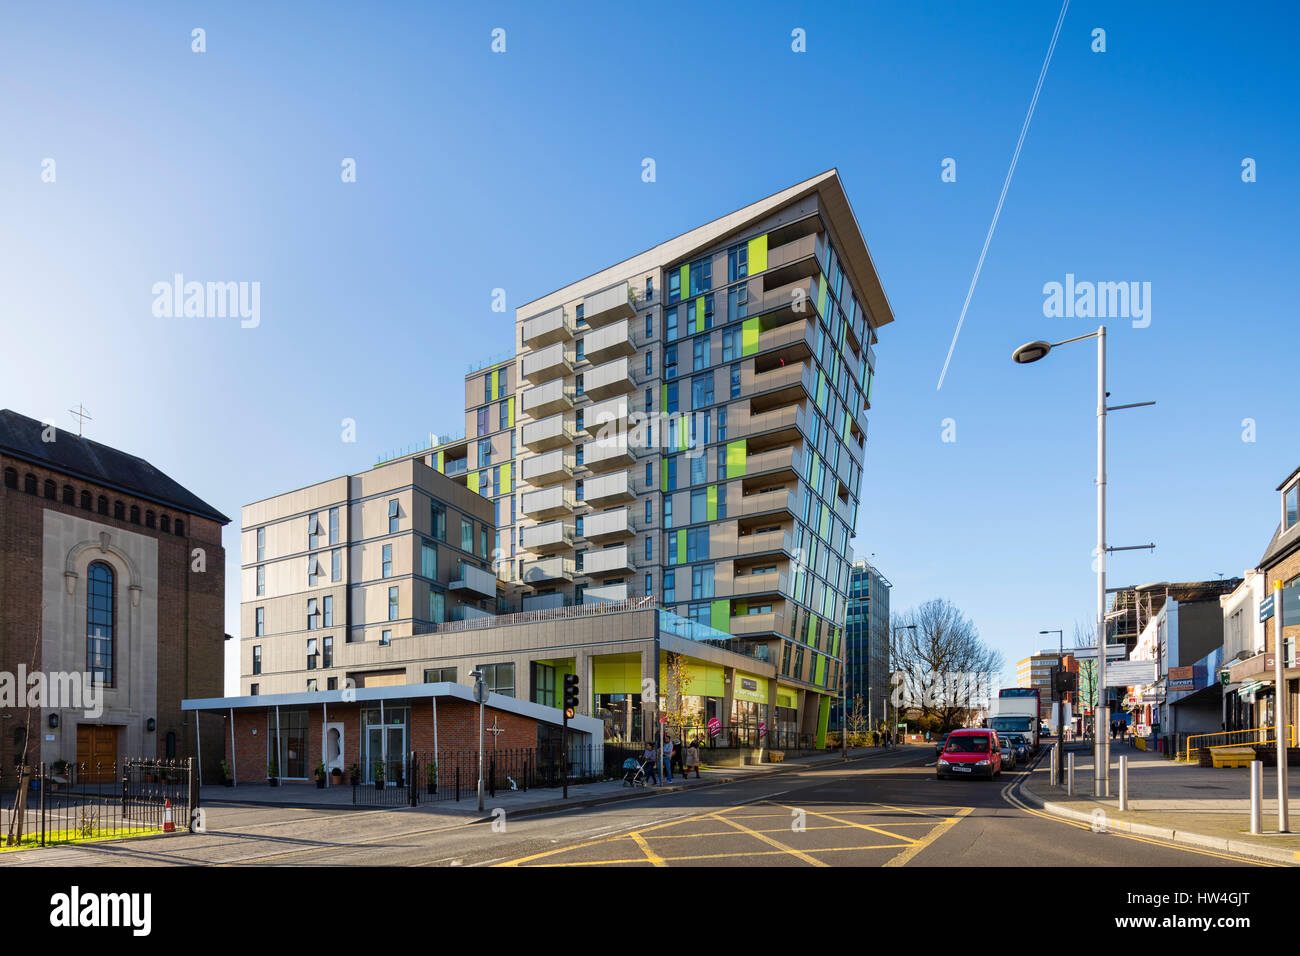 Exterior view of Elizabeth House, Wembley, London, UK. A 13-storey residential led development with retail space on the ground and first floors. Stock Photo